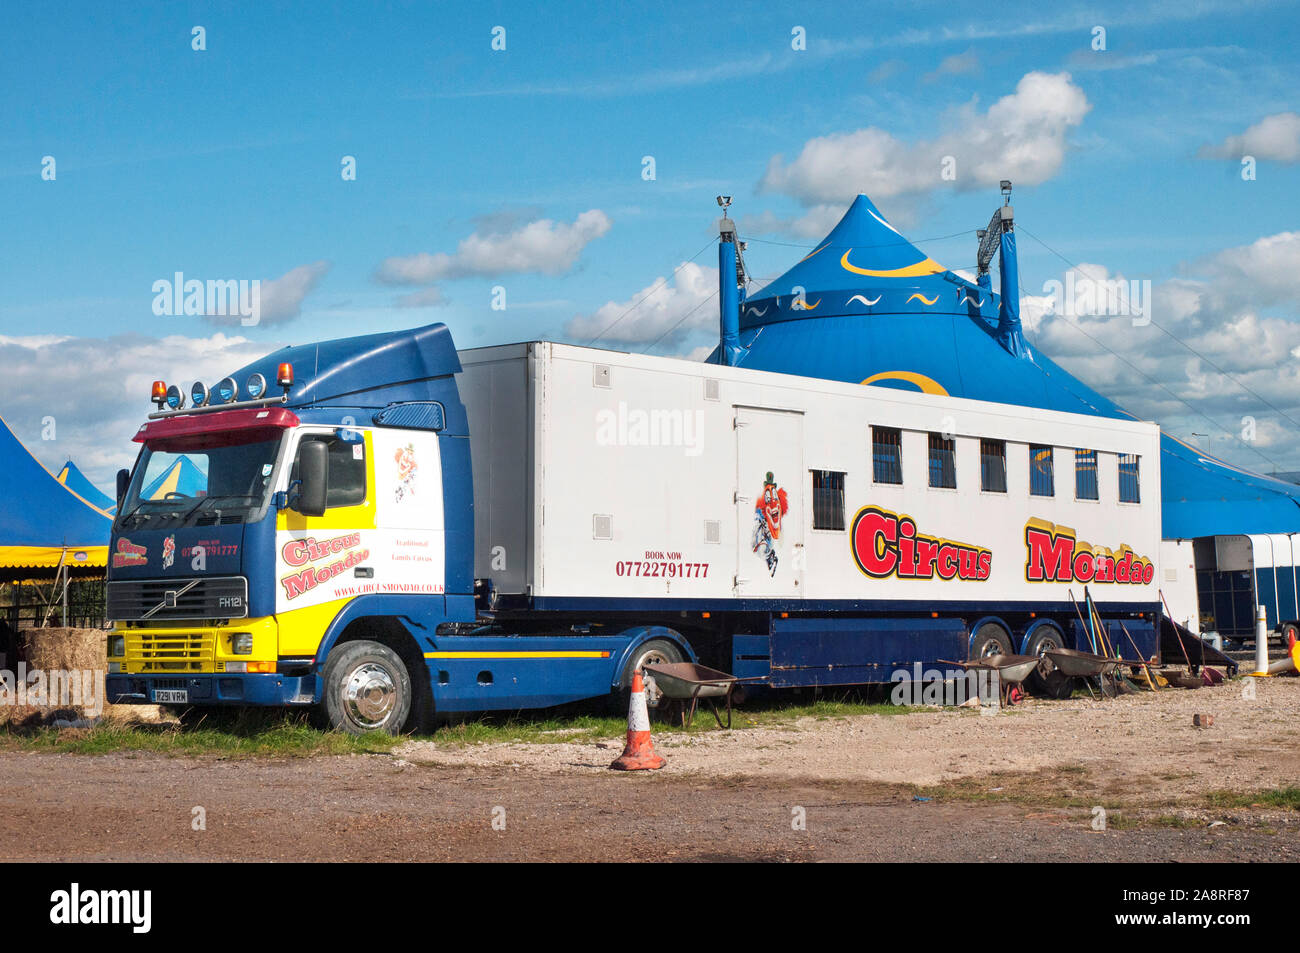 Circus Mondao Articulated lorry for transport of circus animals. Wagon parked by Big Top ready for loading. Stock Photo